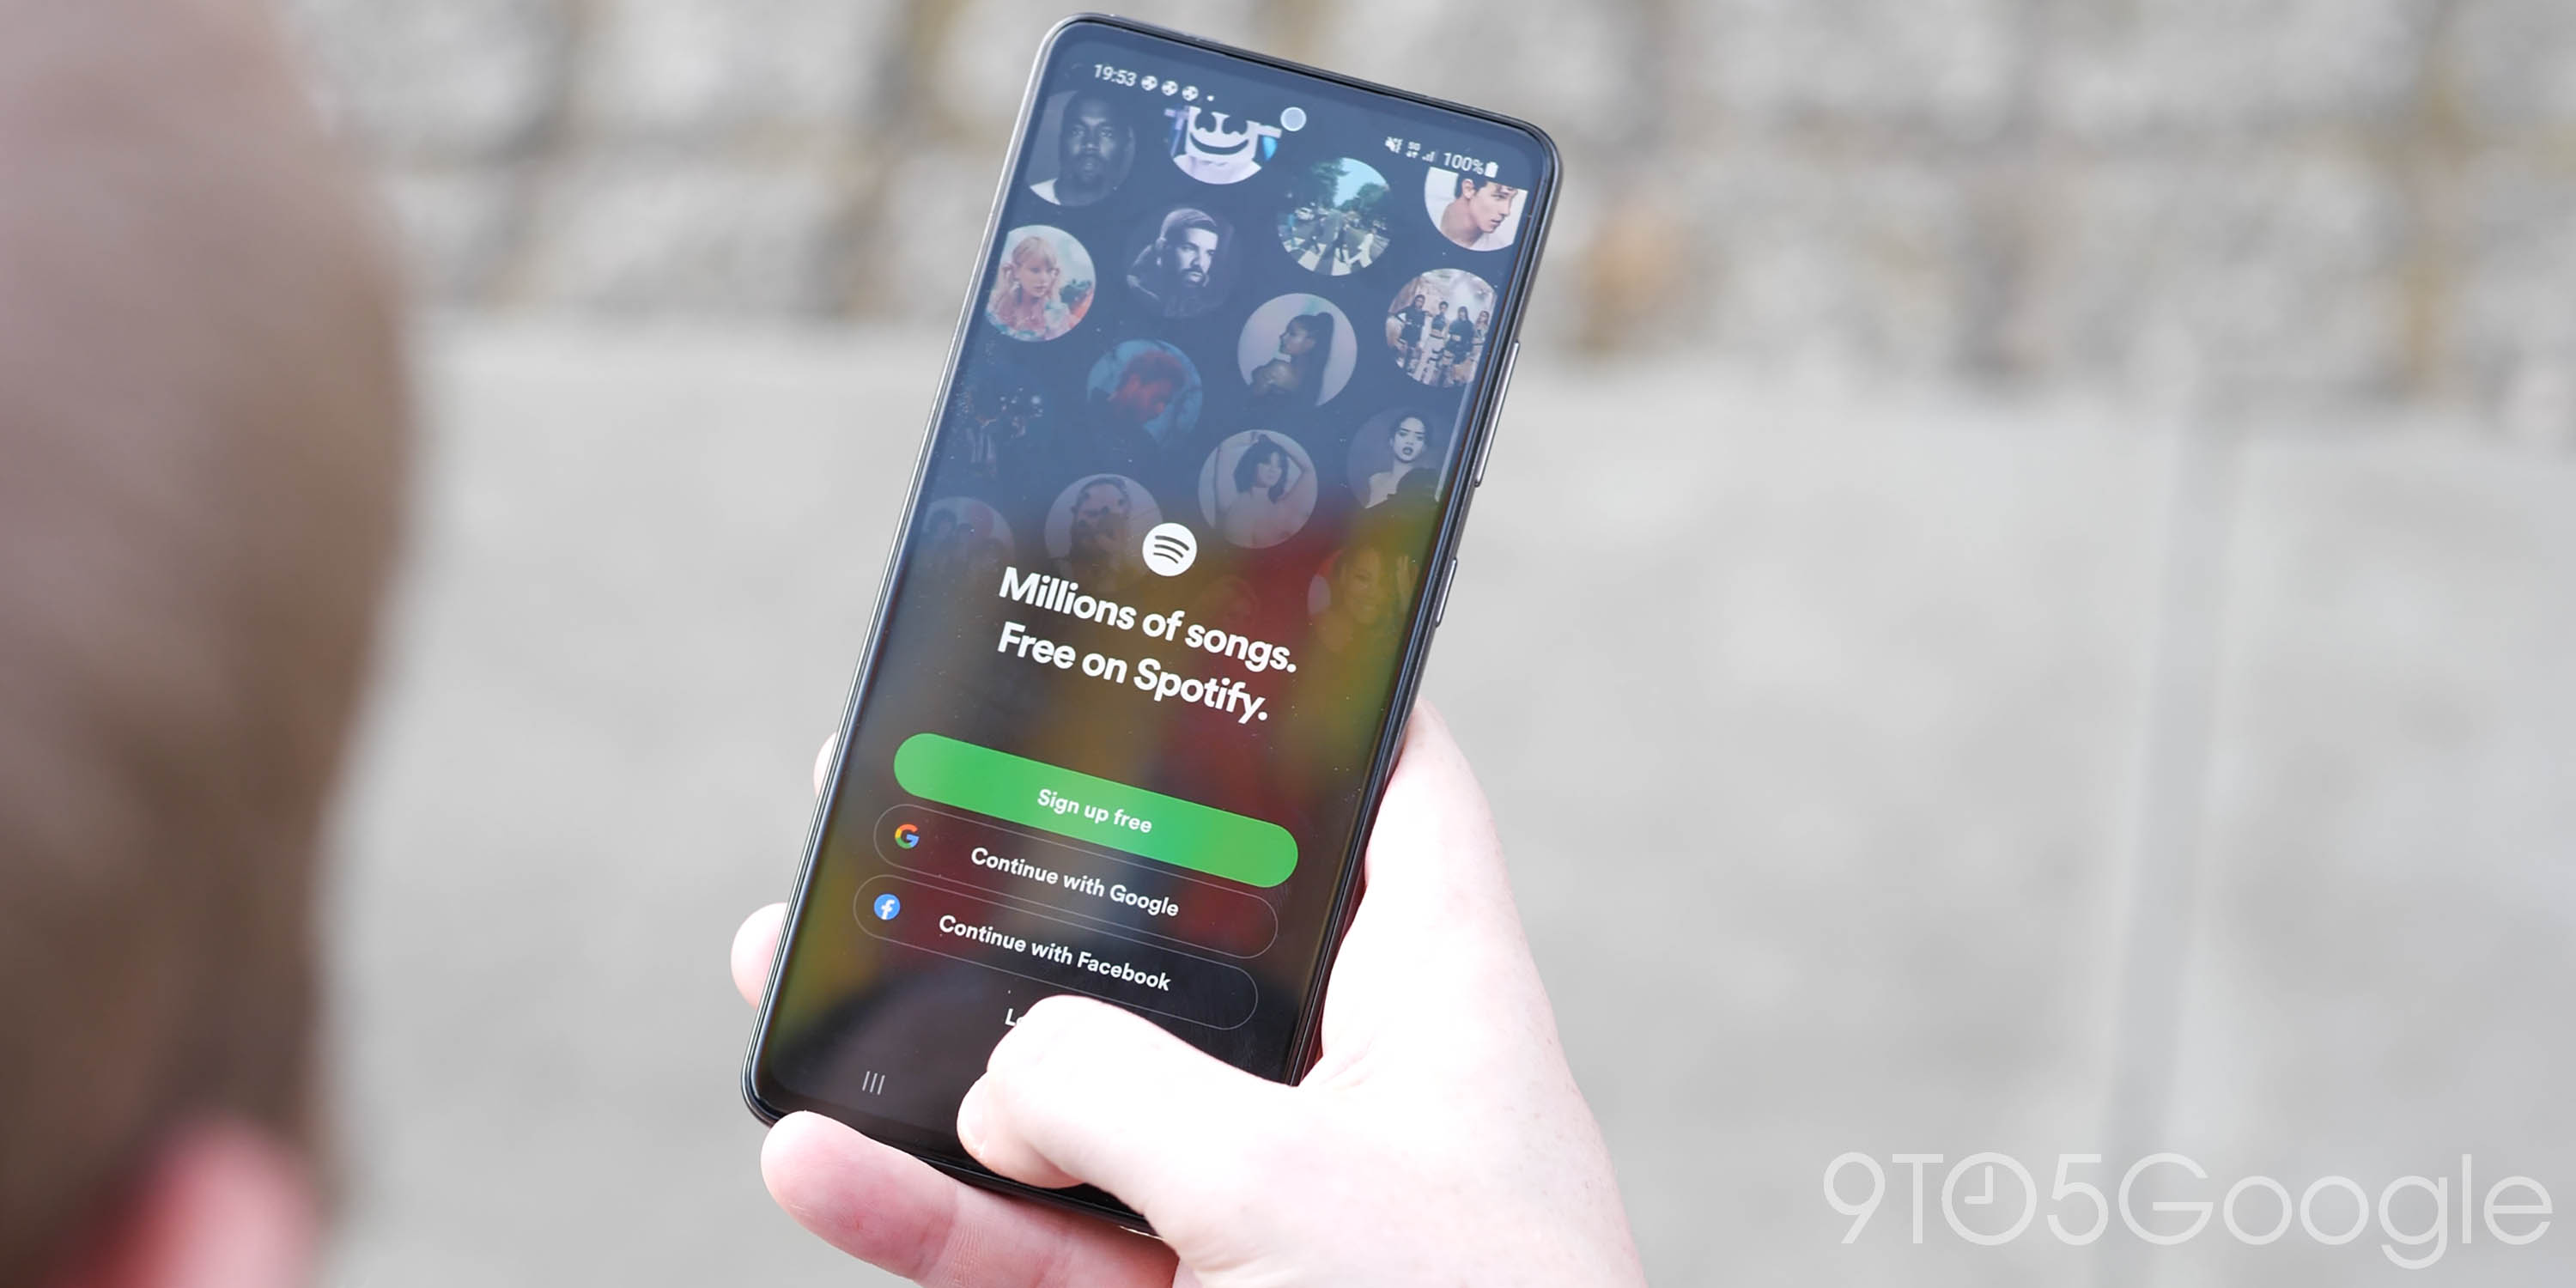 Spotify letting customers 'test drive' overhauled Car Mode